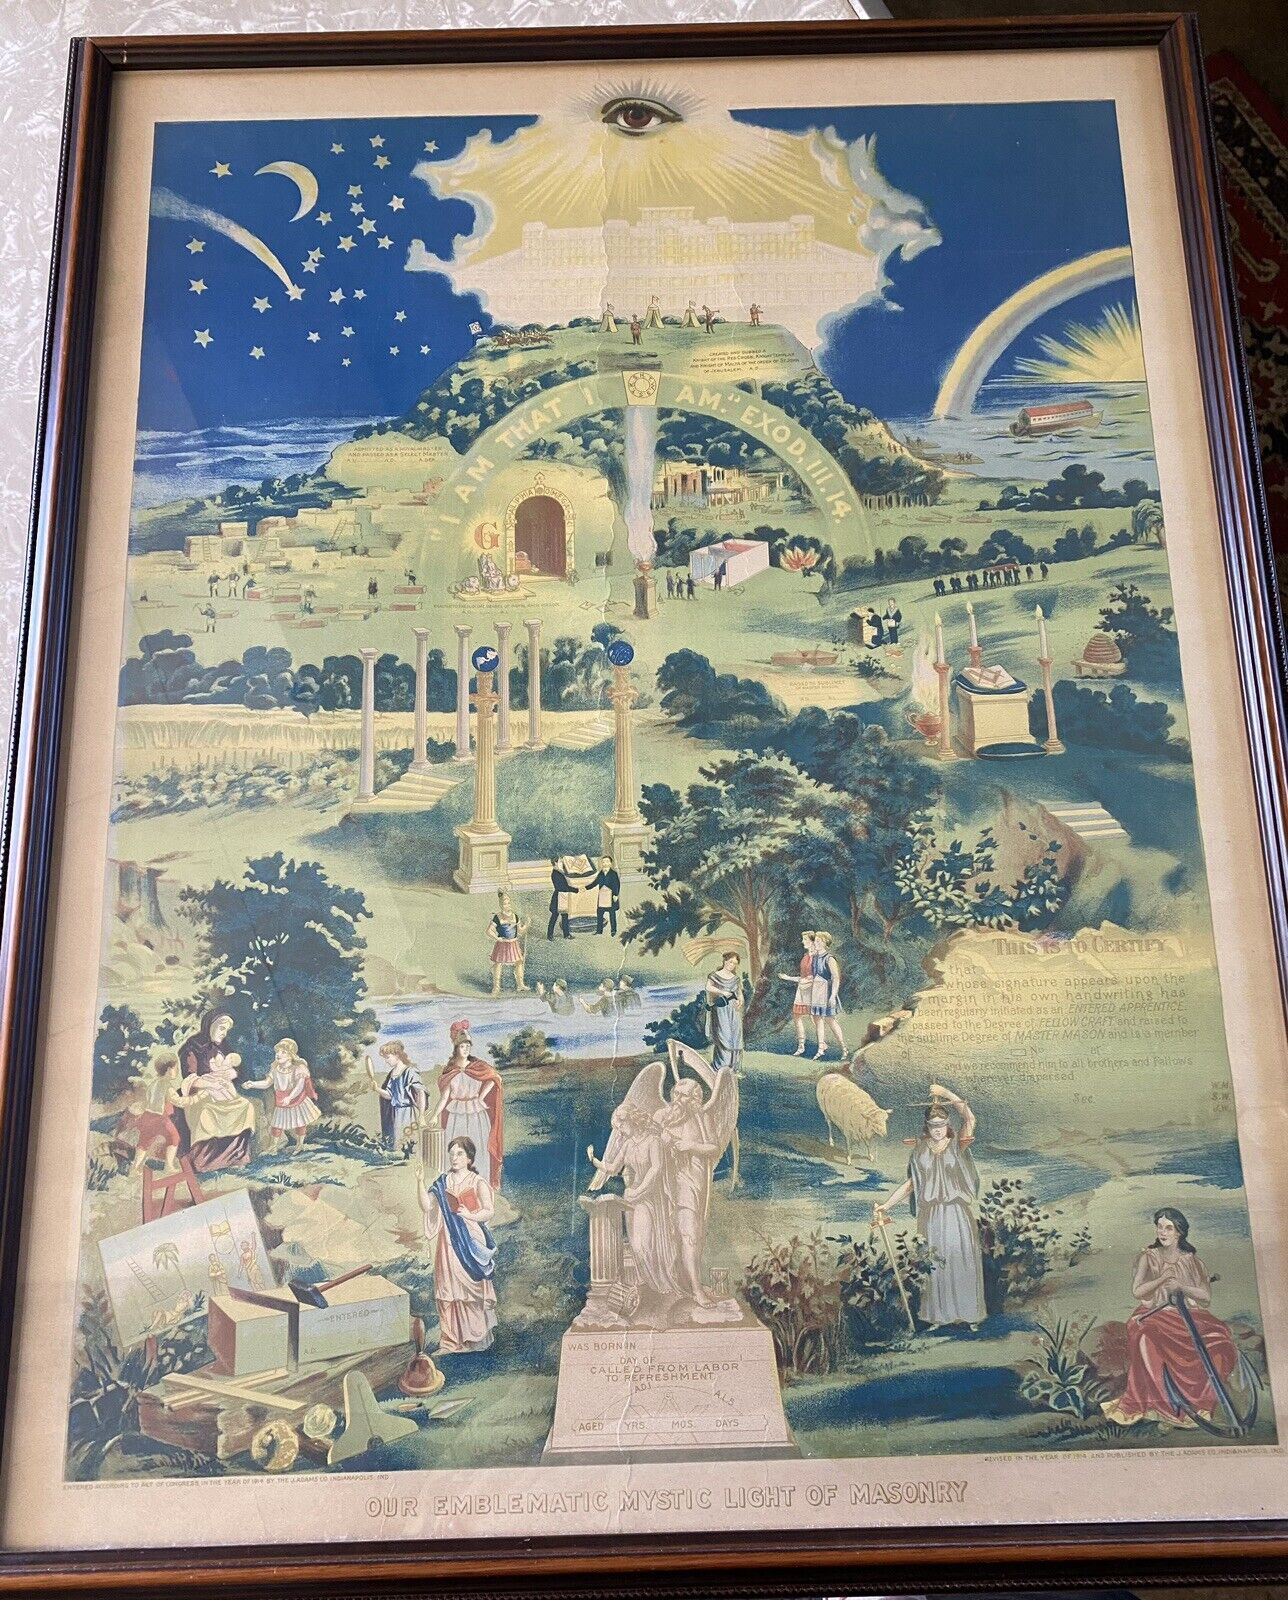 Masonic Poster 1914 Our Emblematic Mystic Light of Masonry framed 22x29 Indiana